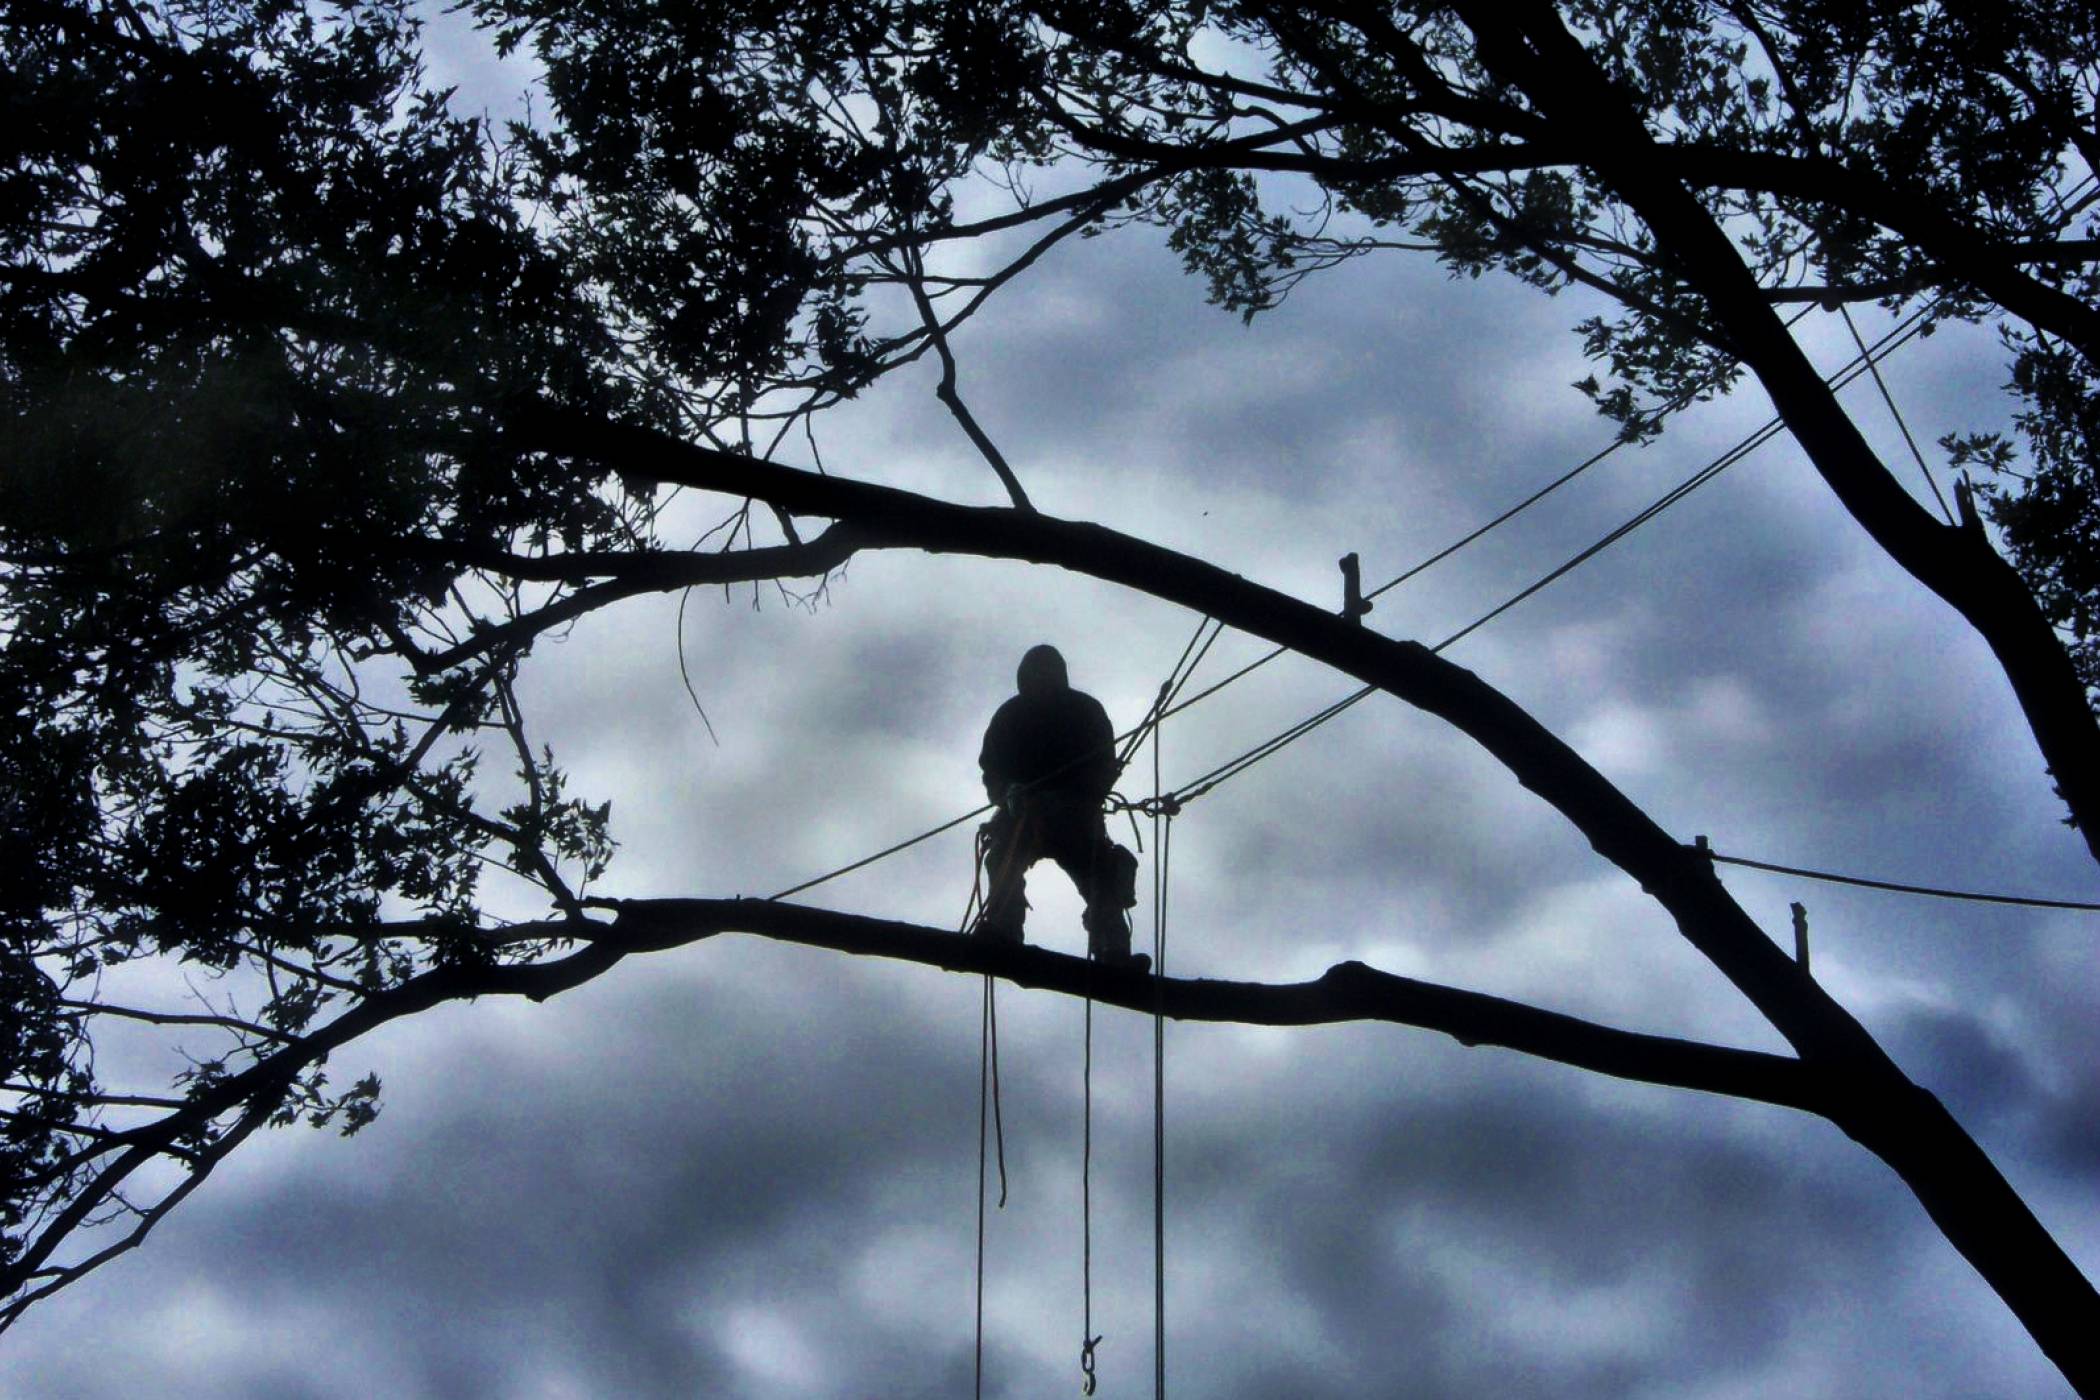 Silhouette of Beaver Dam Tree Removal Services employee standing in a tree preparing for removal.